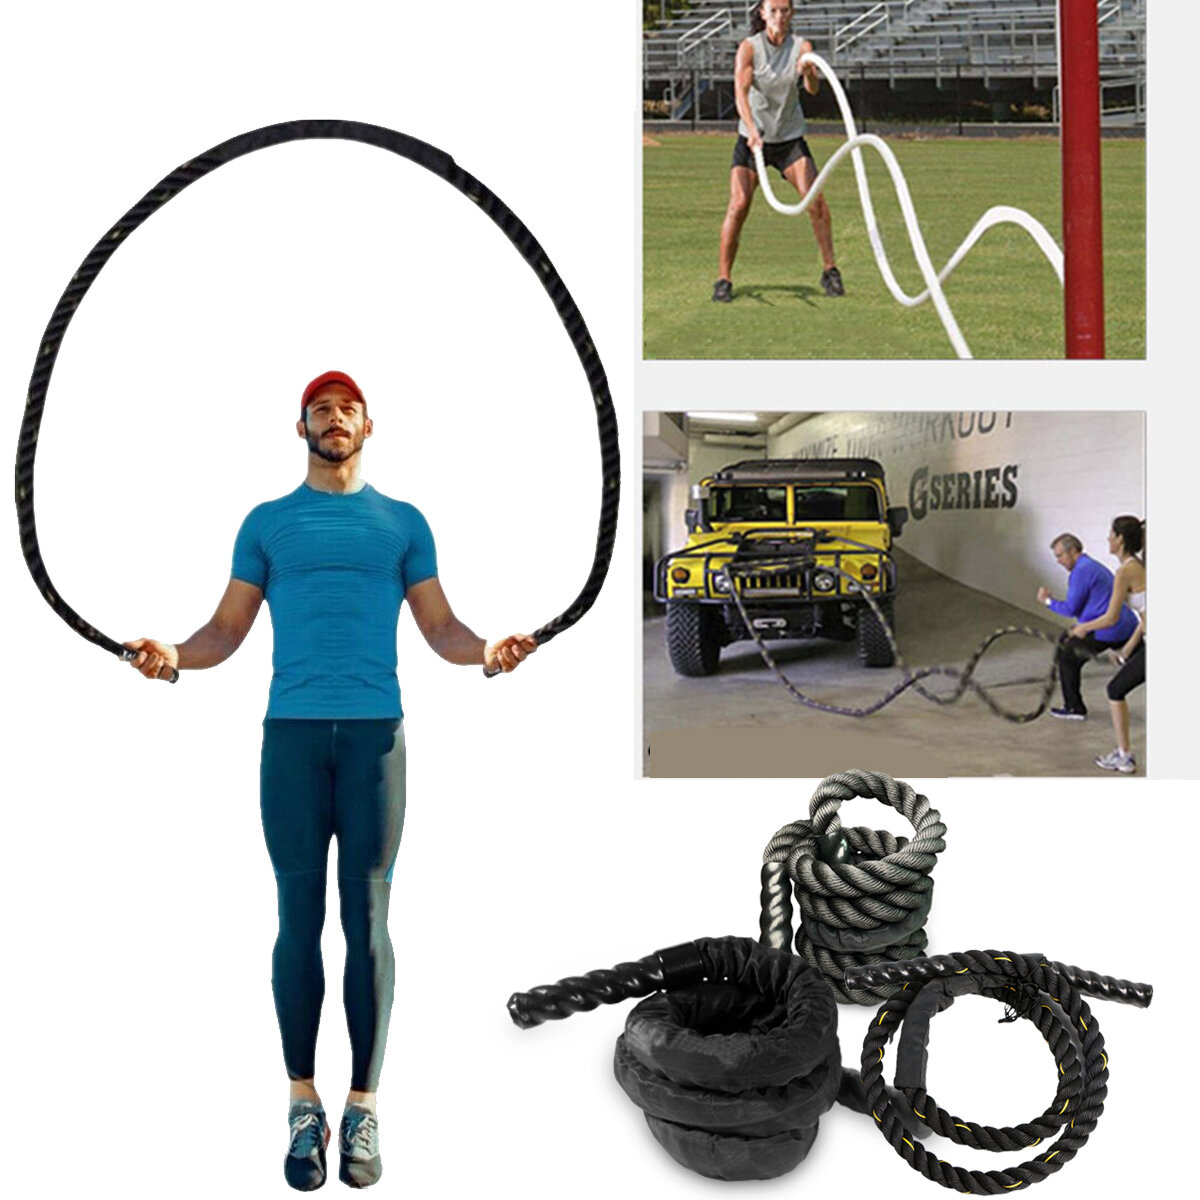 Fitness Weighted Jump Rope 25mm Heavy Battle Skipping Ropes Strength Training 